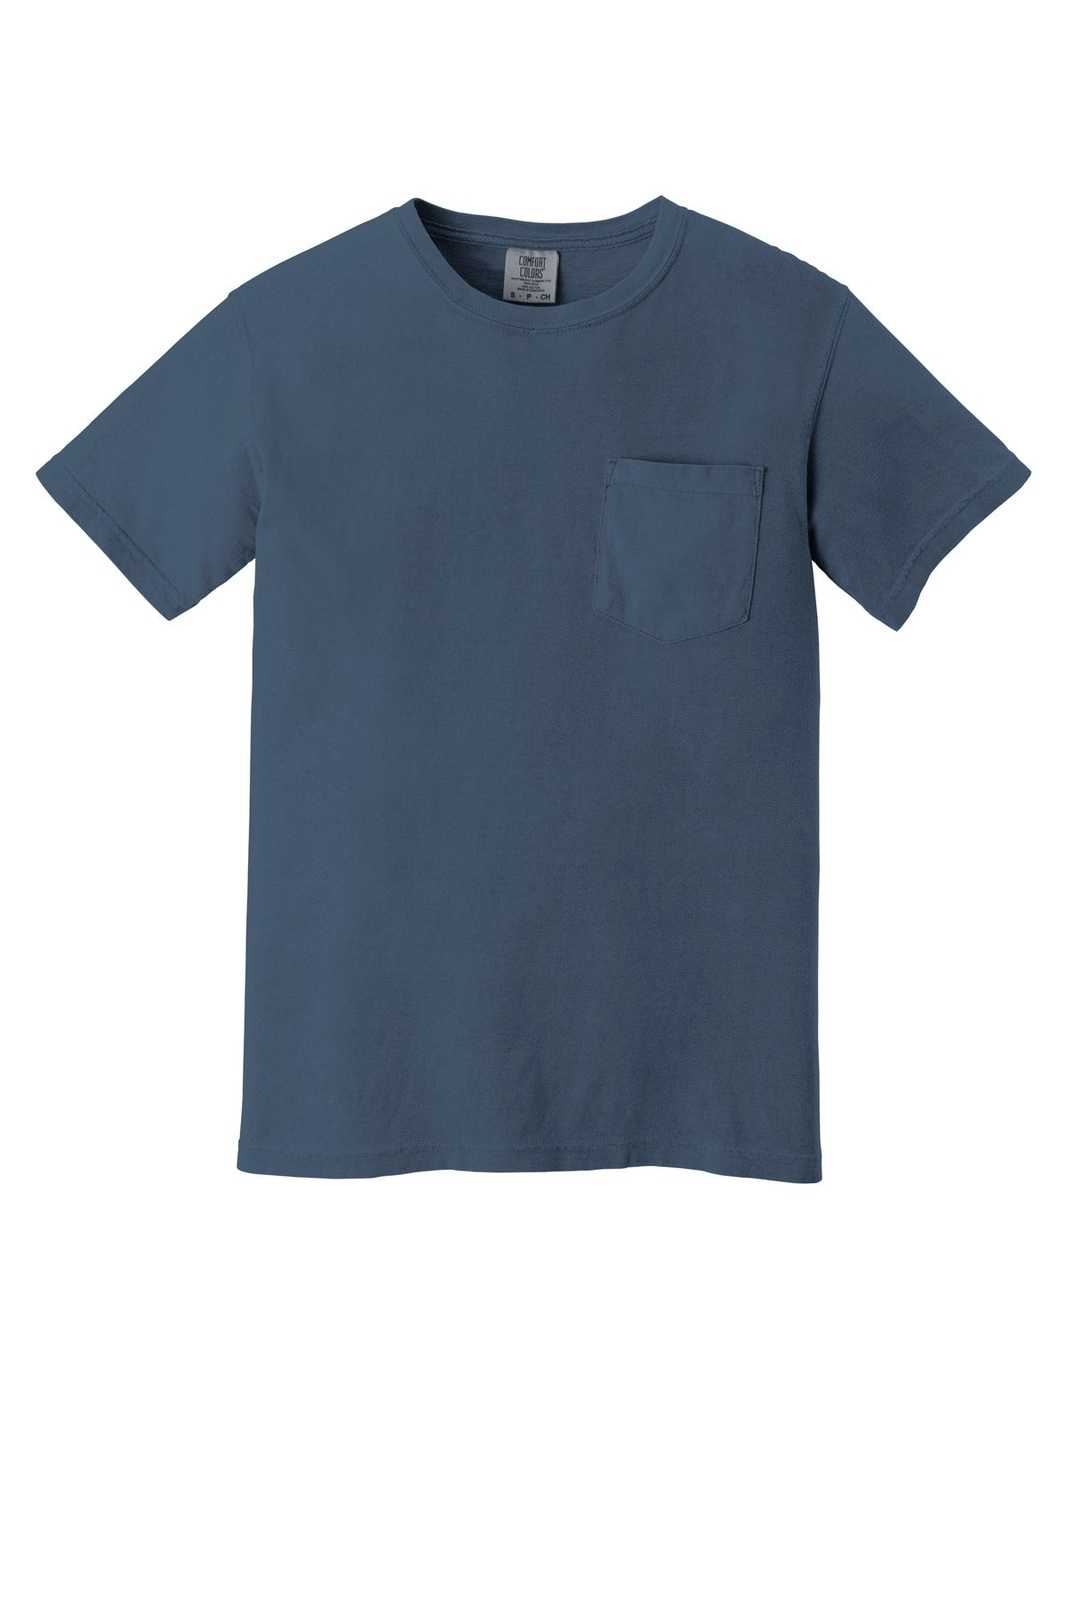 Comfort Colors 6030 Heavyweight Ring Spun Pocket Tee - Blue Jean - HIT a Double